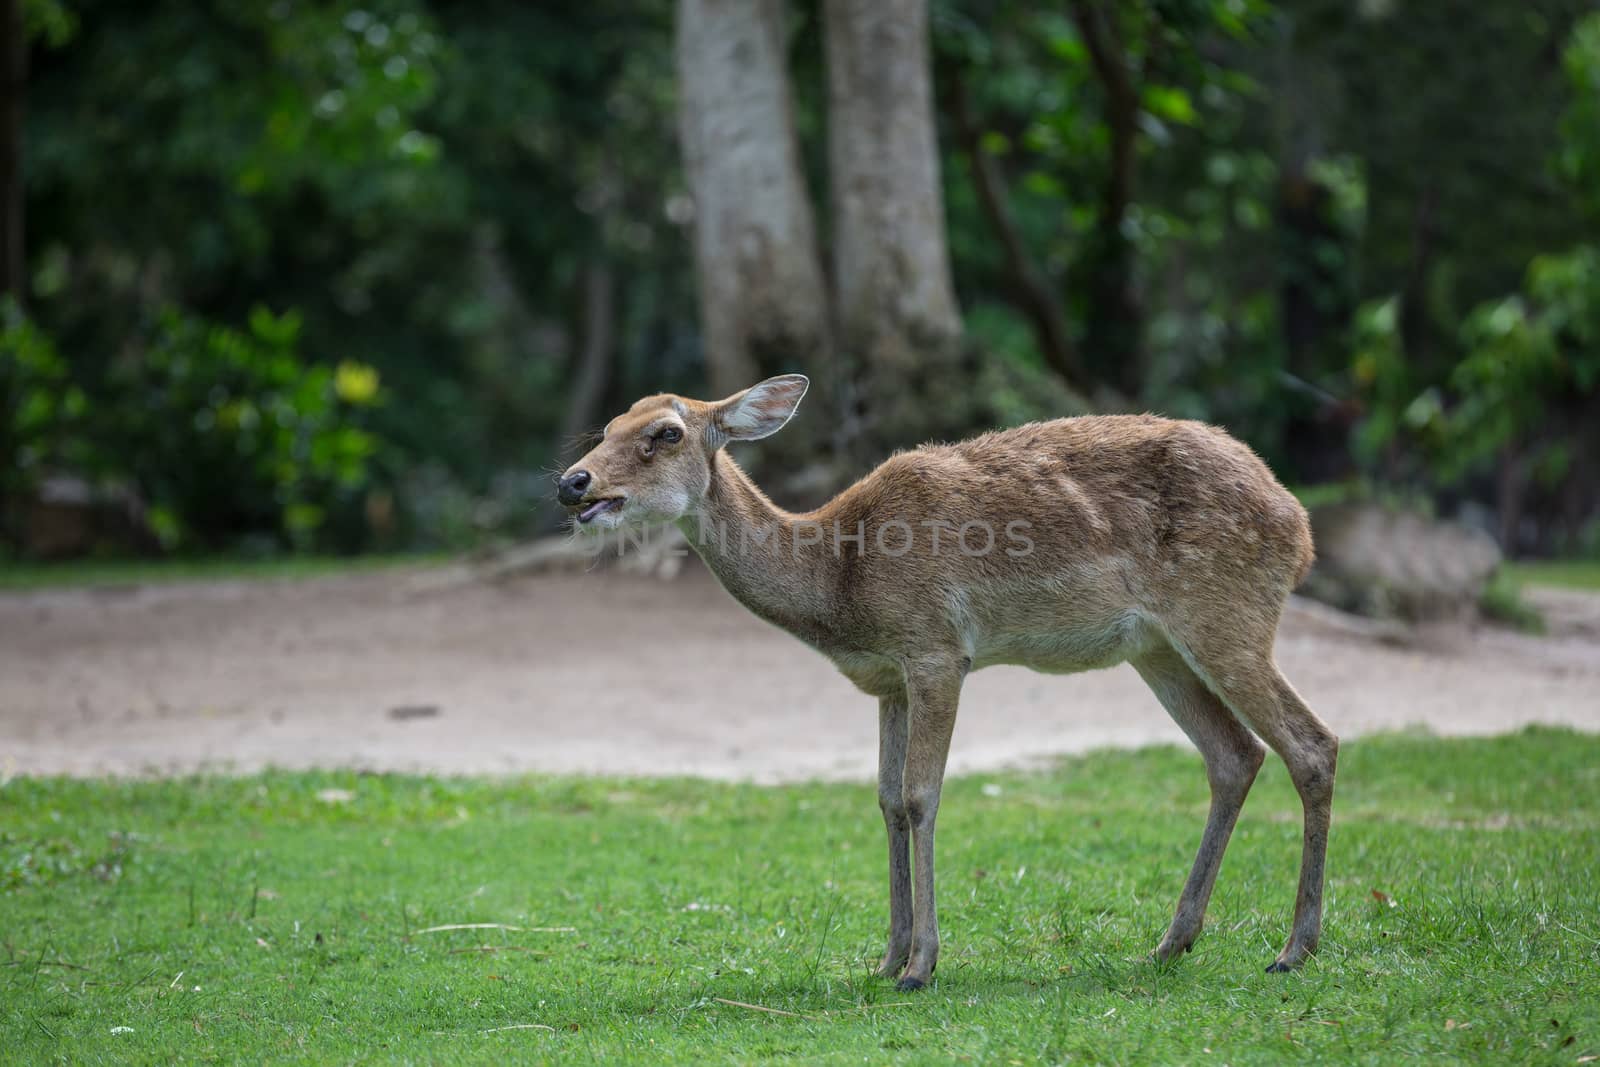 antelope deer eating on the grass with green forest in the background